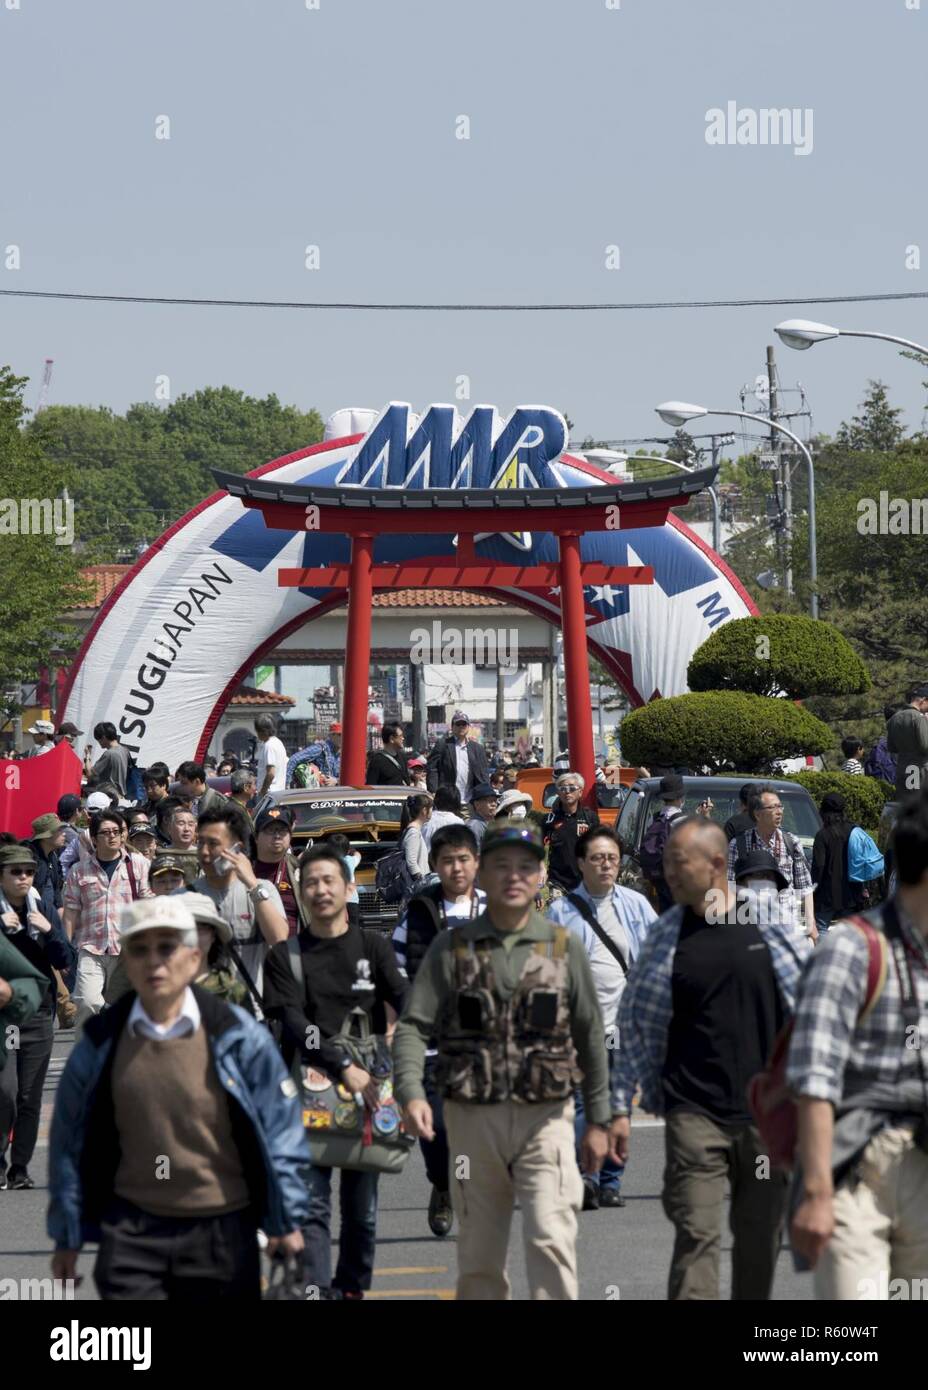 NAVAL AIR FACILITY ATSUGI, Japan (April 29, 2017) Visitors pass through the entrance to Naval Air Facility (NAF) Atsugi’s annual Spring Fest event. The open base festival draws crowds in excess of 65,000 visitors each year. NAF Atsugi has hosted open base community friendship events for nearly 30 years as a means to build closer ties and understanding to the communities around the base and all over Japan. Stock Photo